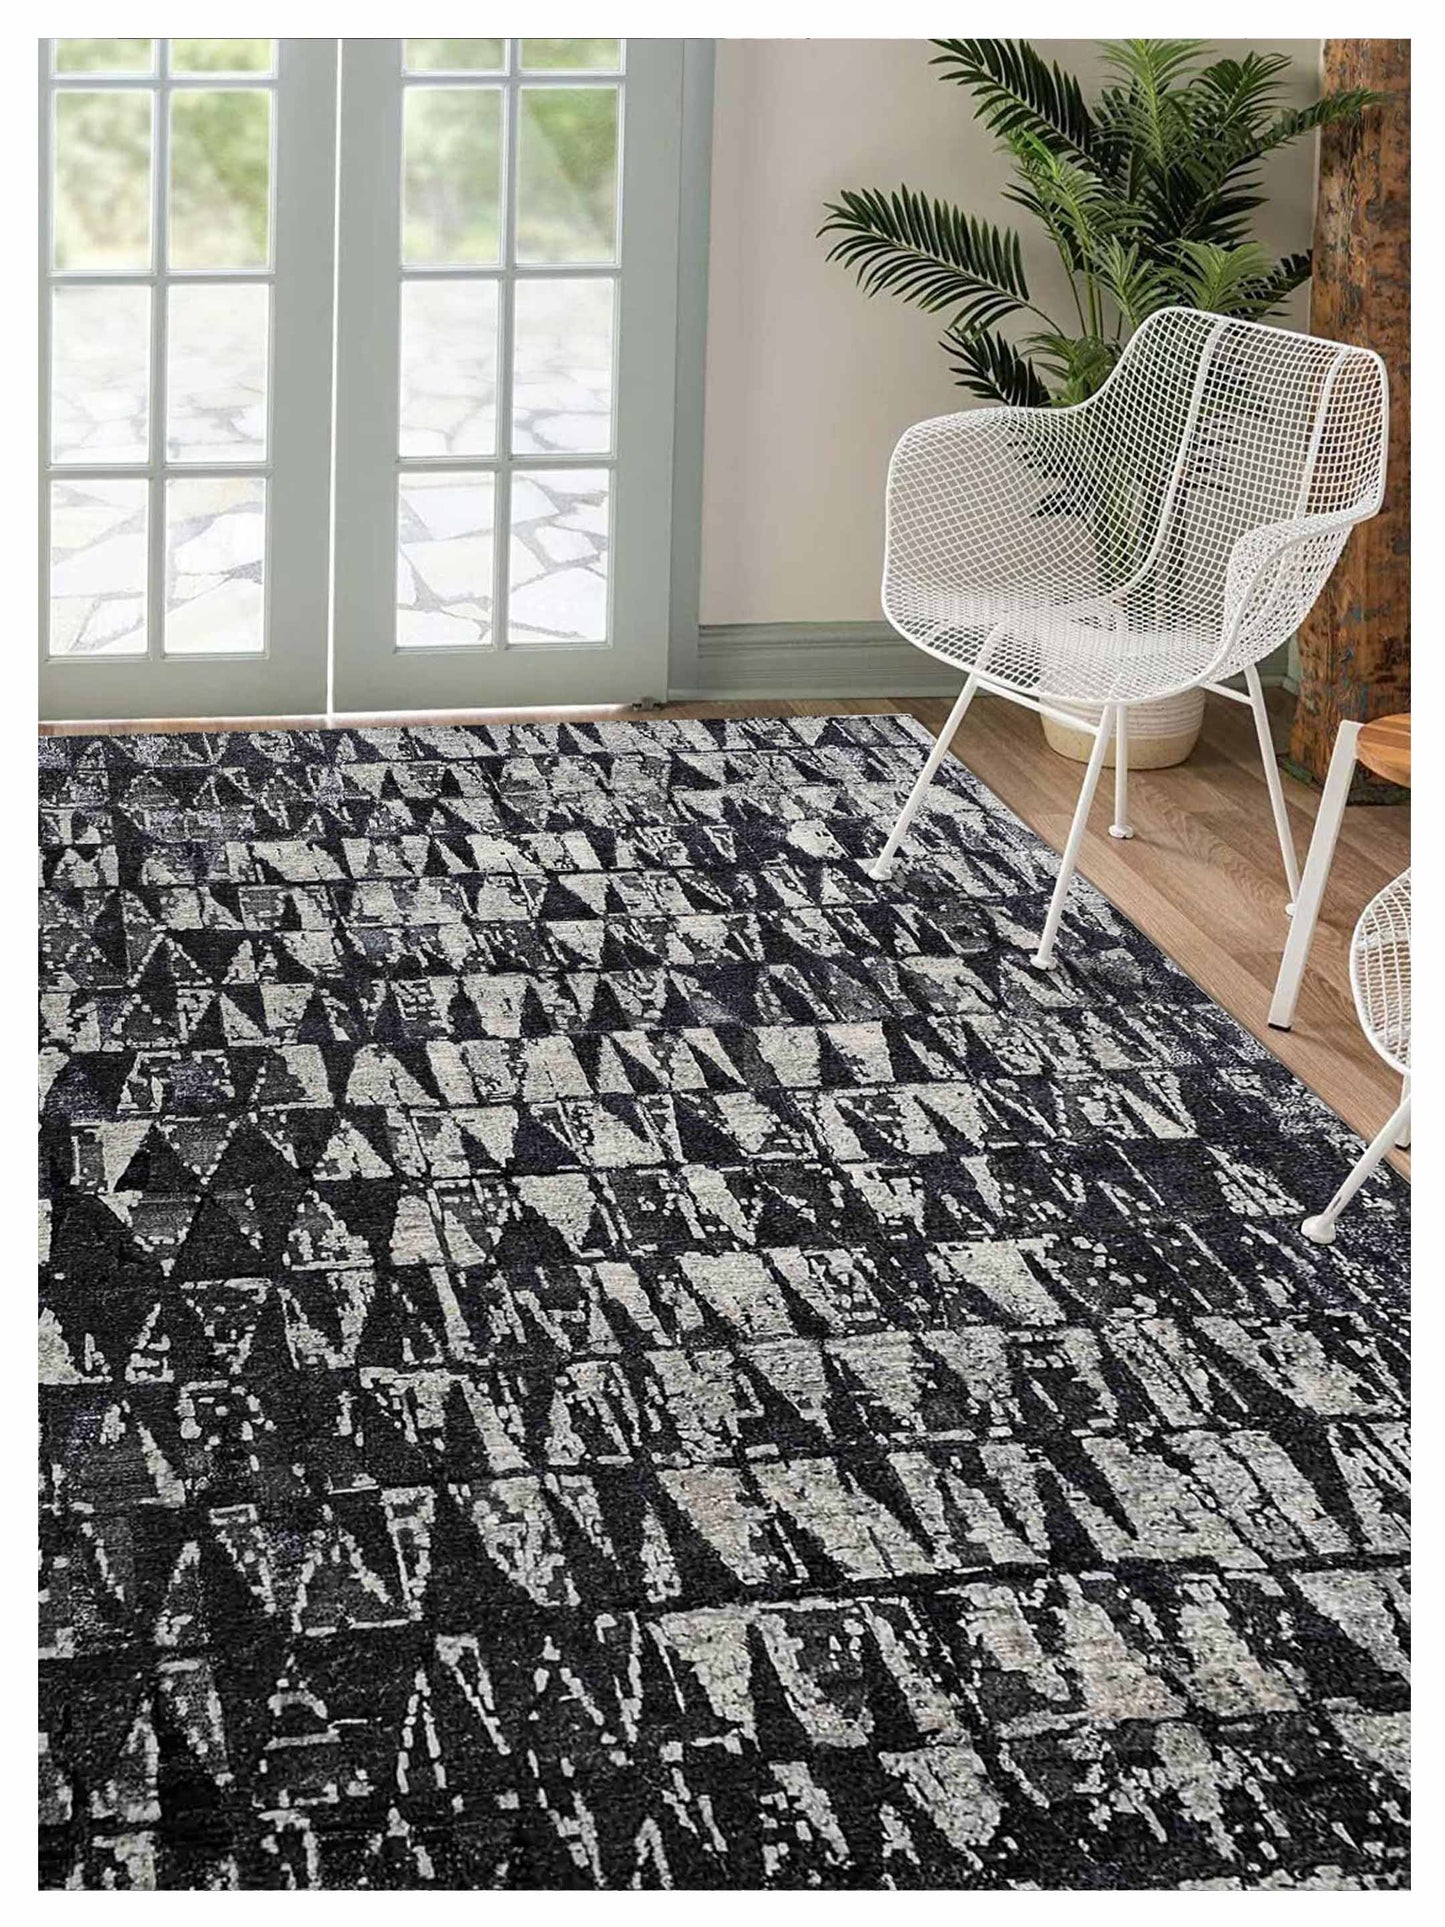 Artisan Mary  Carbon  Contemporary Knotted Rug